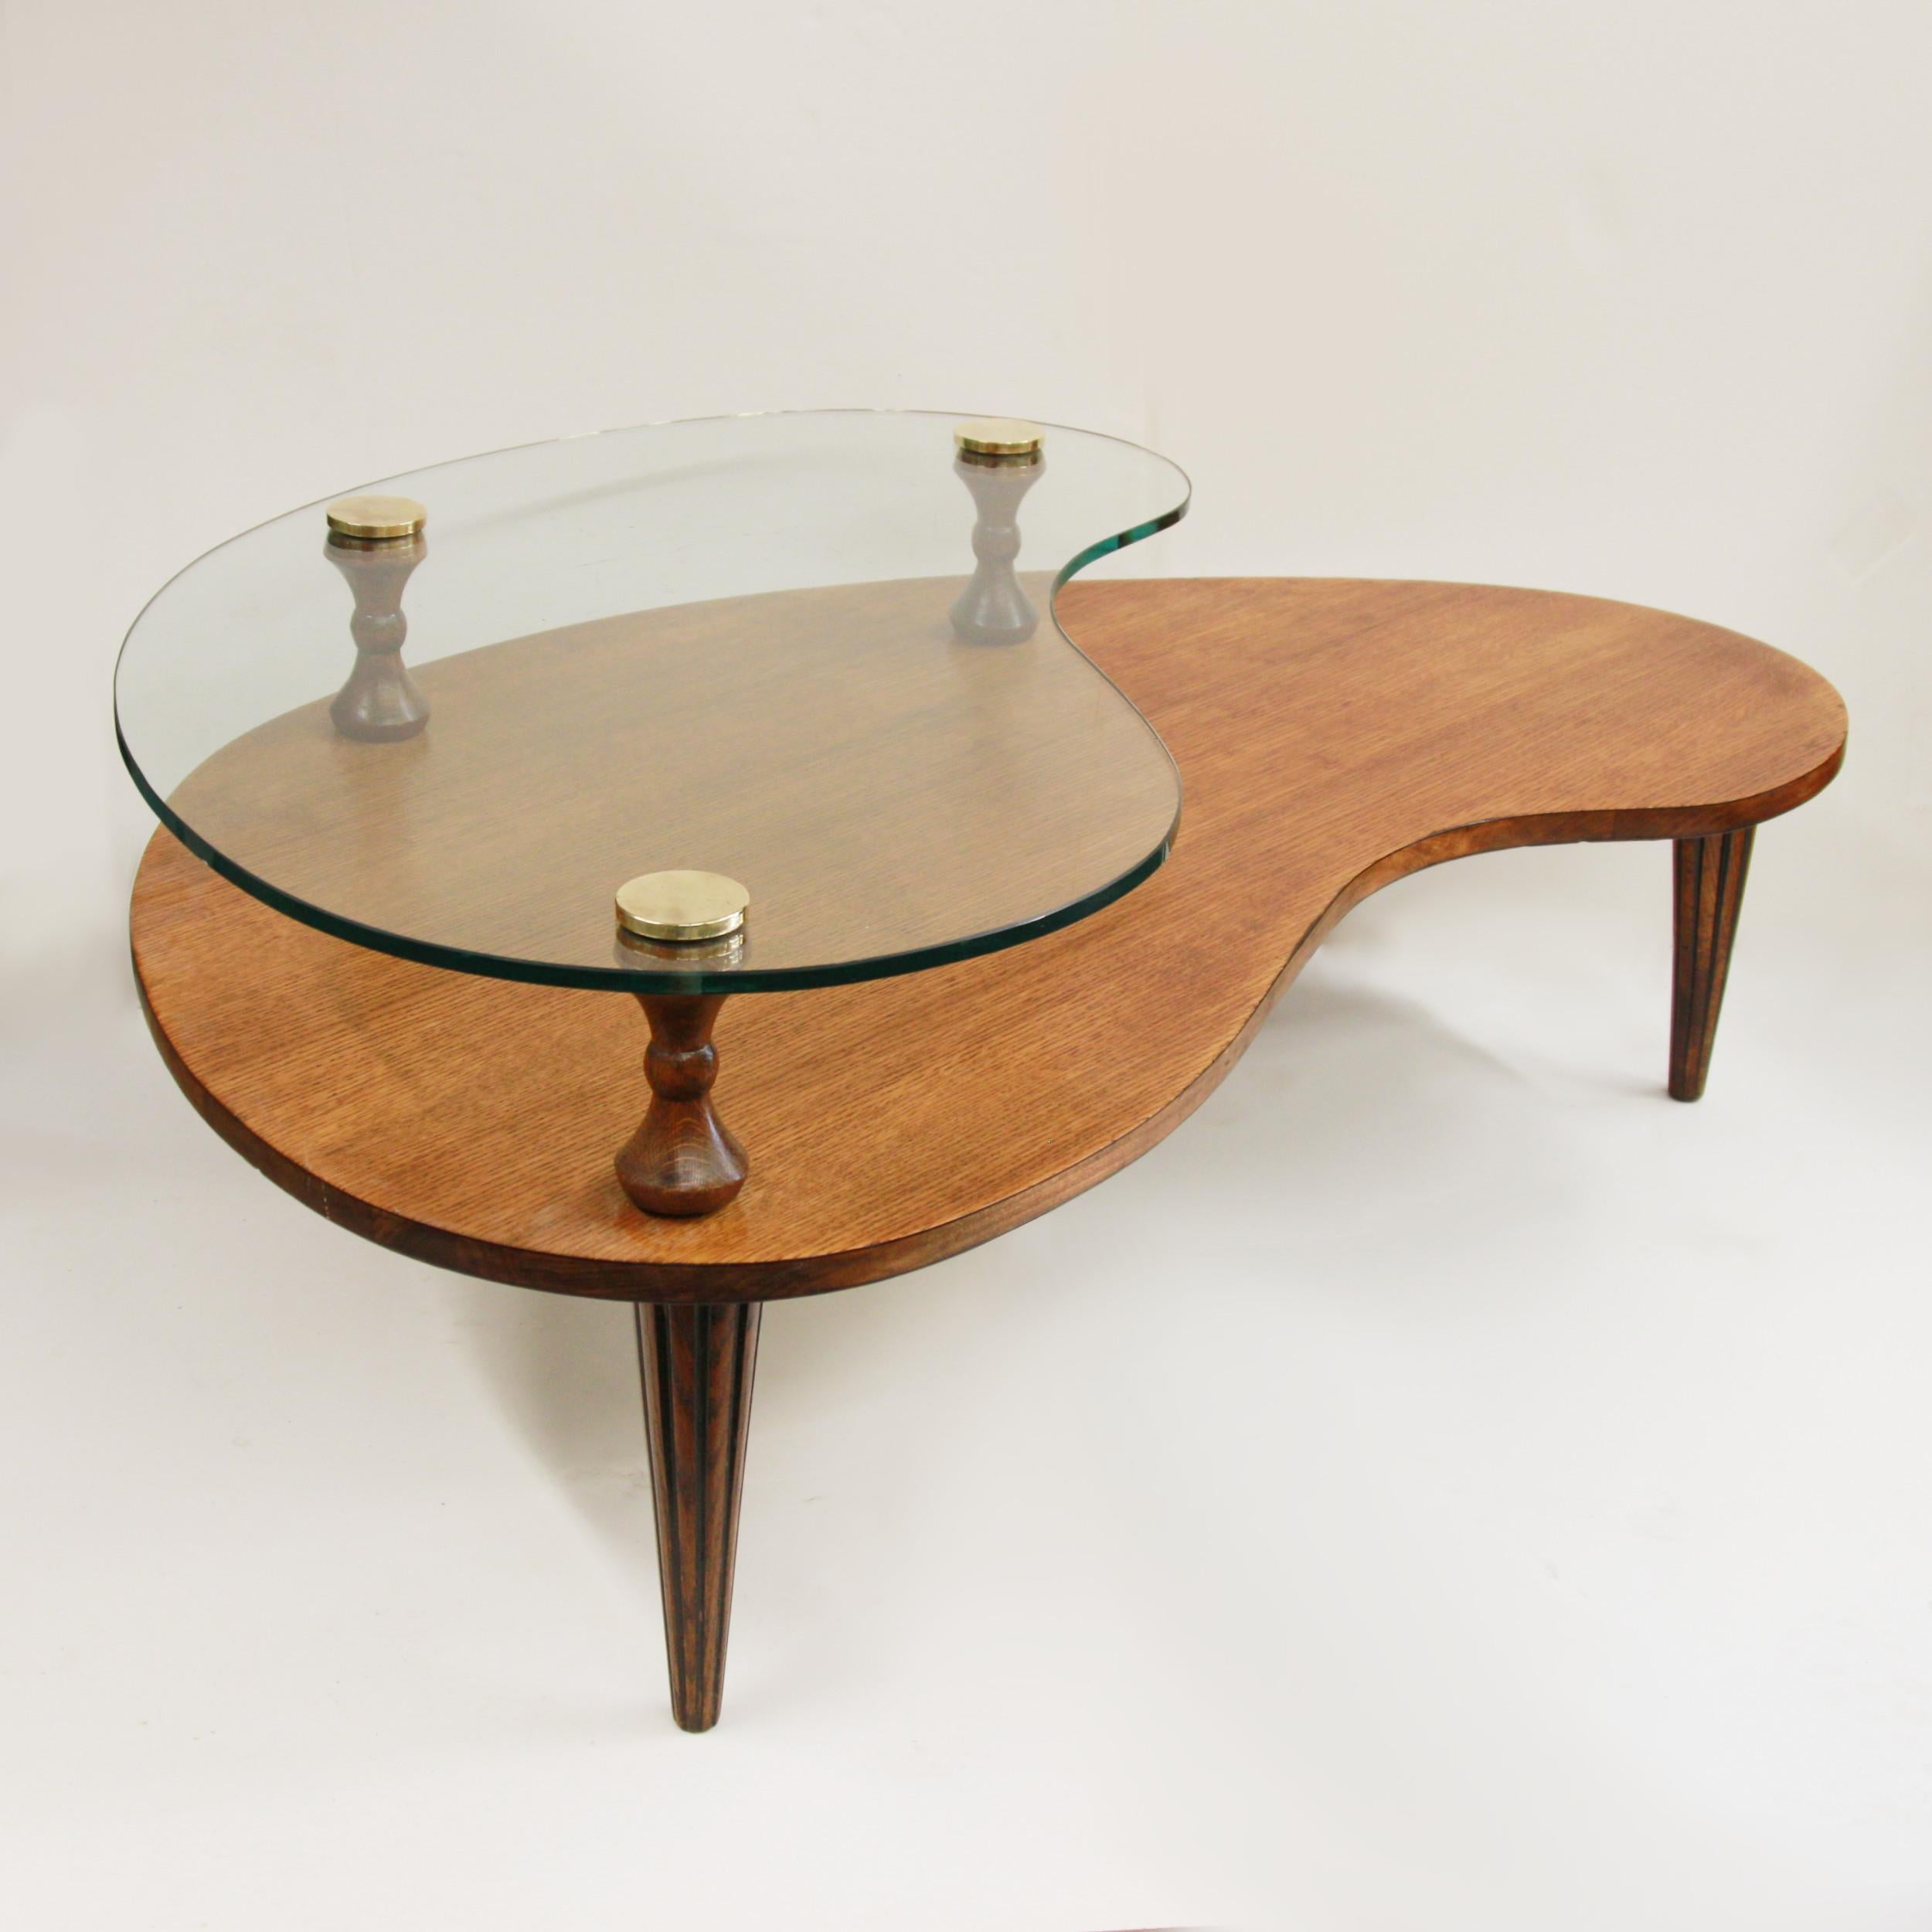 Fantastic biomorphic/kidney shaped coffee table attributed to Gilbert Rohde for Herman Miller.  

Table features:

- Two-tiered top
- Tapered oak legs with fluting
- Turned oak risers
- Solid brass screw-caps

This is a high-quality, high-style